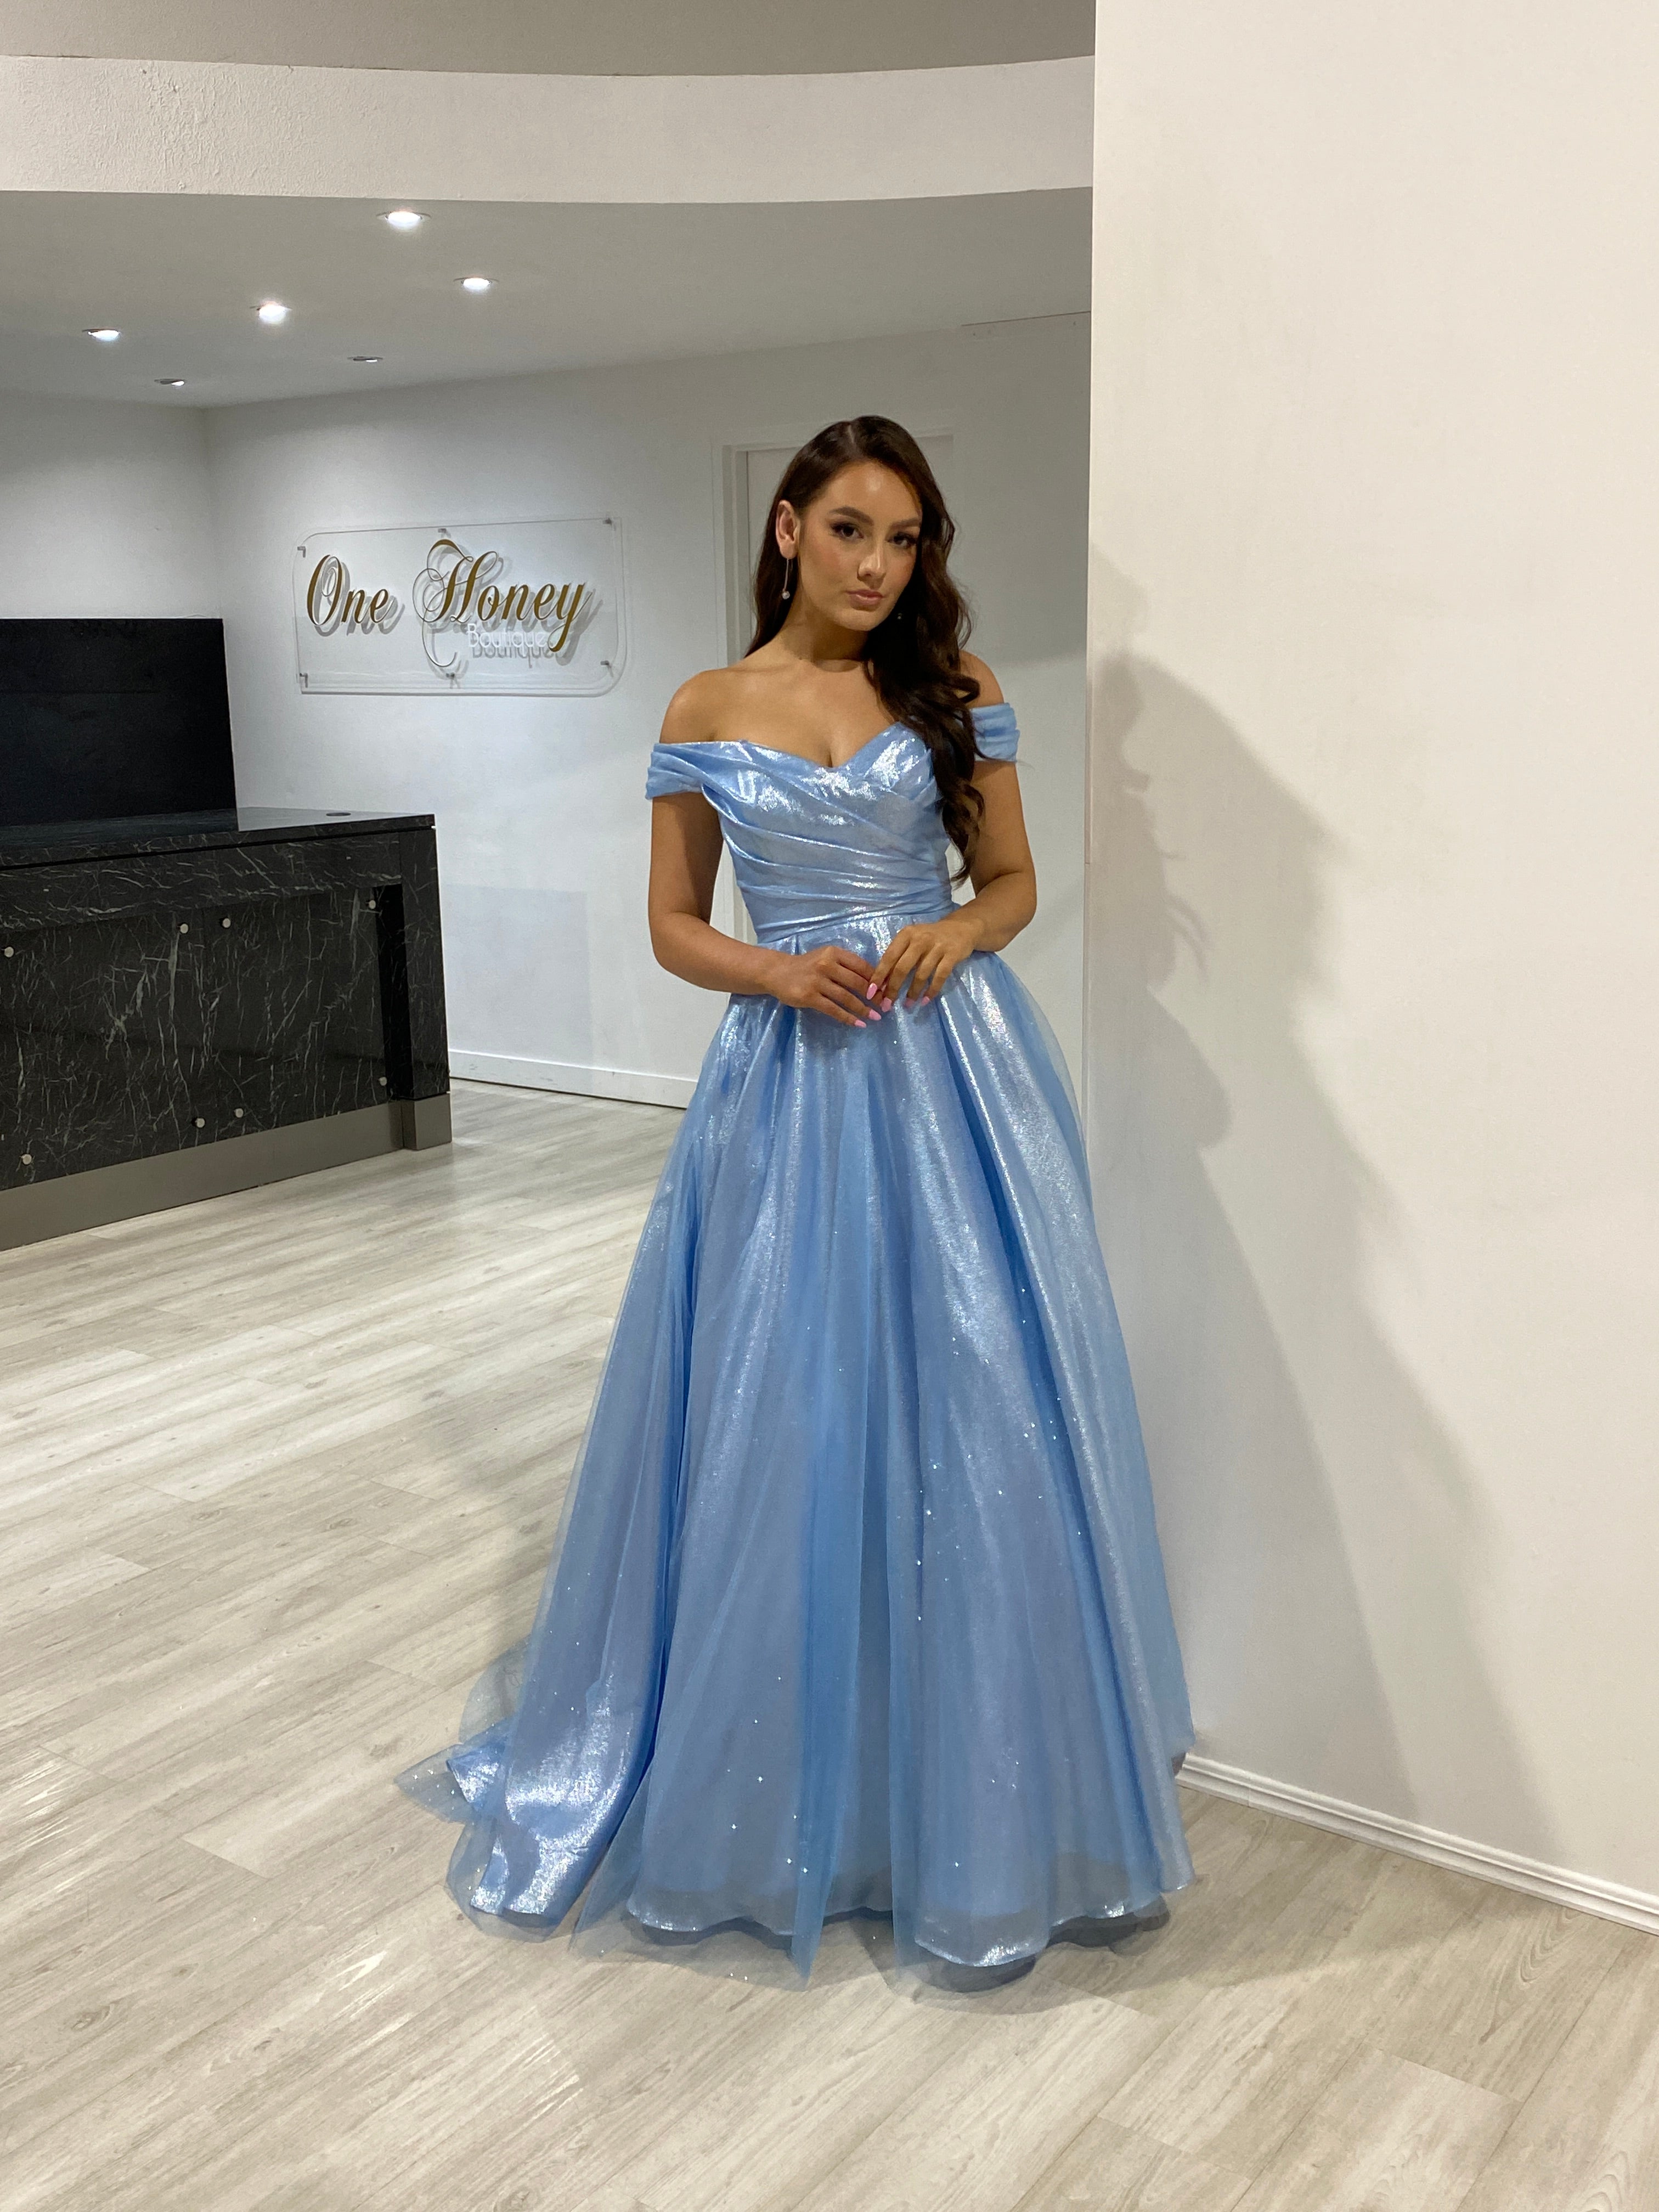 Honey Couture ARIANA Baby Blue Shimmer Ballgown Formal Dress